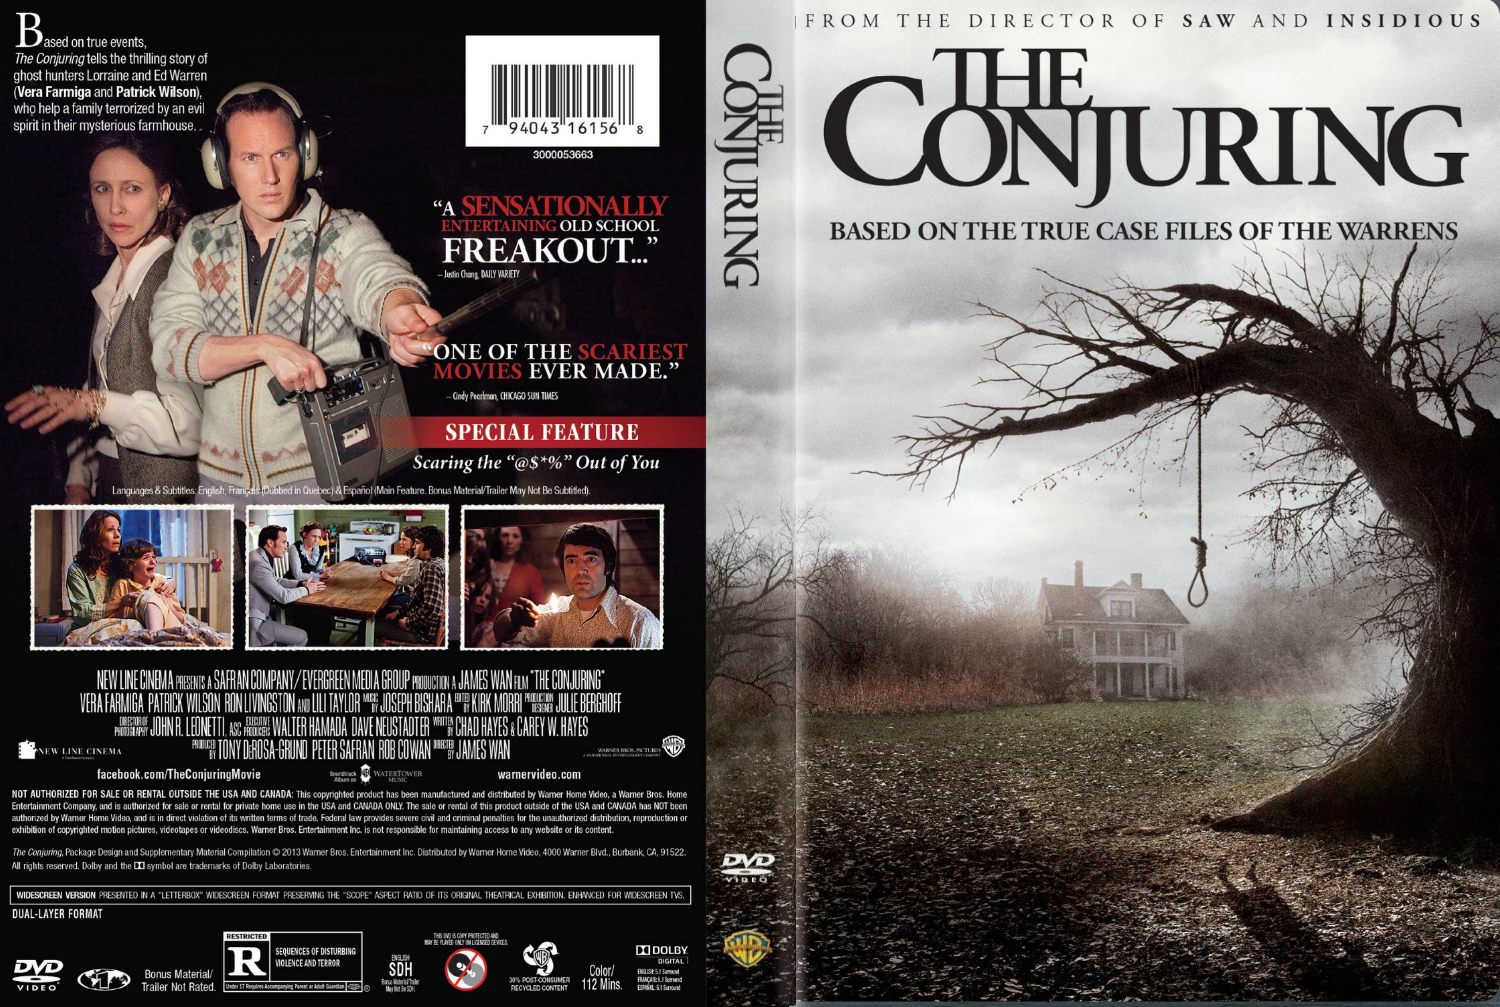 Jaquette DVD The conjuring Zone 1 v2